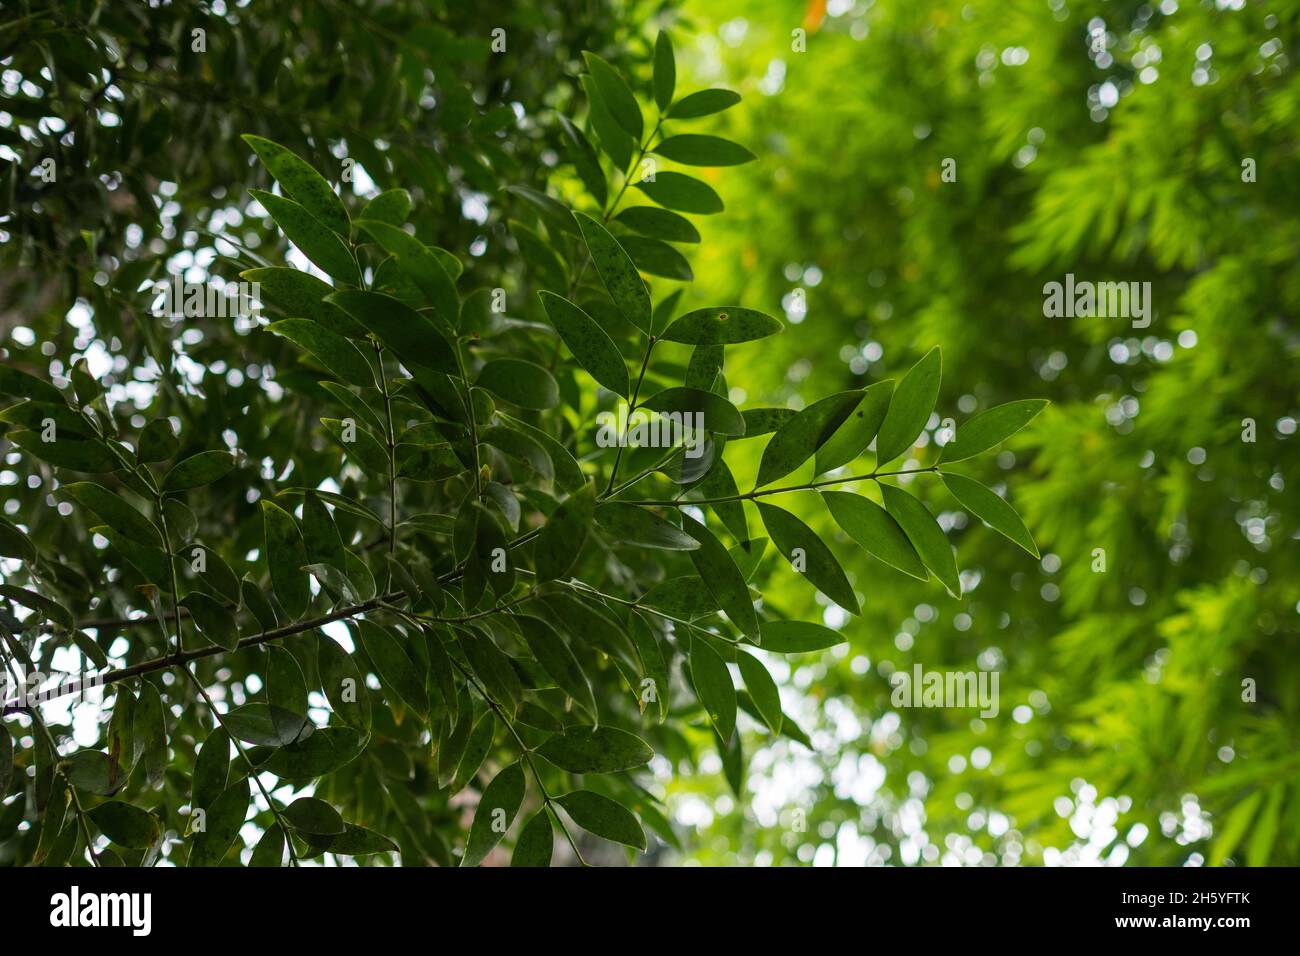 July 2017. Almacega (Agathis philippinensis) is the source of the resin which is one of the main non-timber forest products driving the local economy. Kayasan, Barangay Tagabinet, Palawan, Philippines. Stock Photo